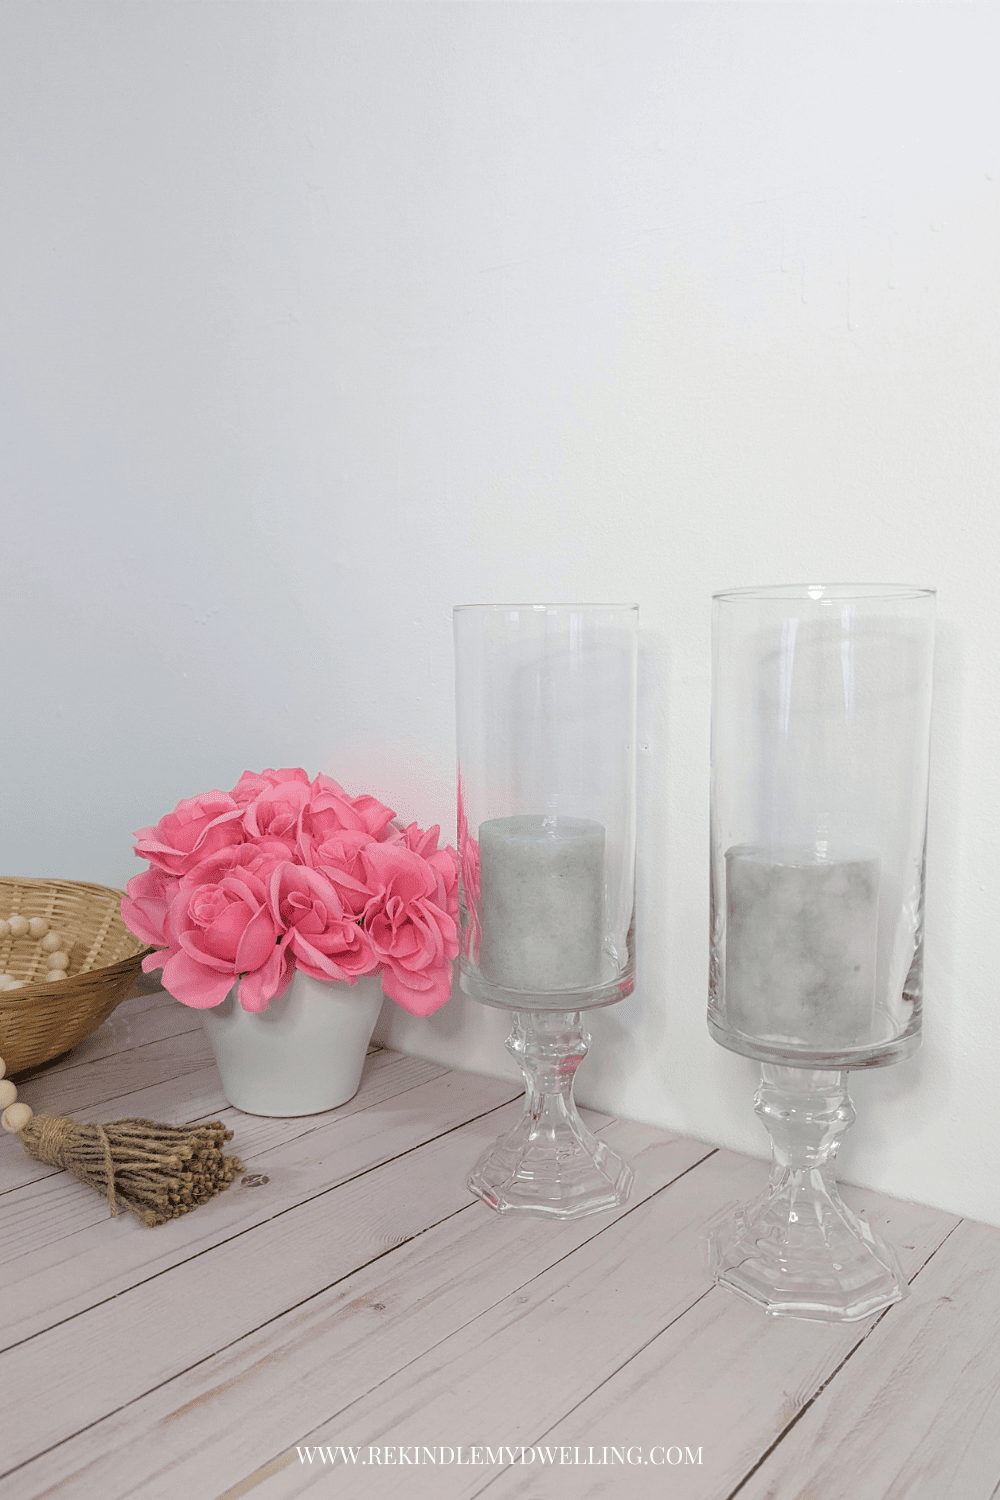 Pedestal vases with candles placed next to a bouquet of flowers and beads.